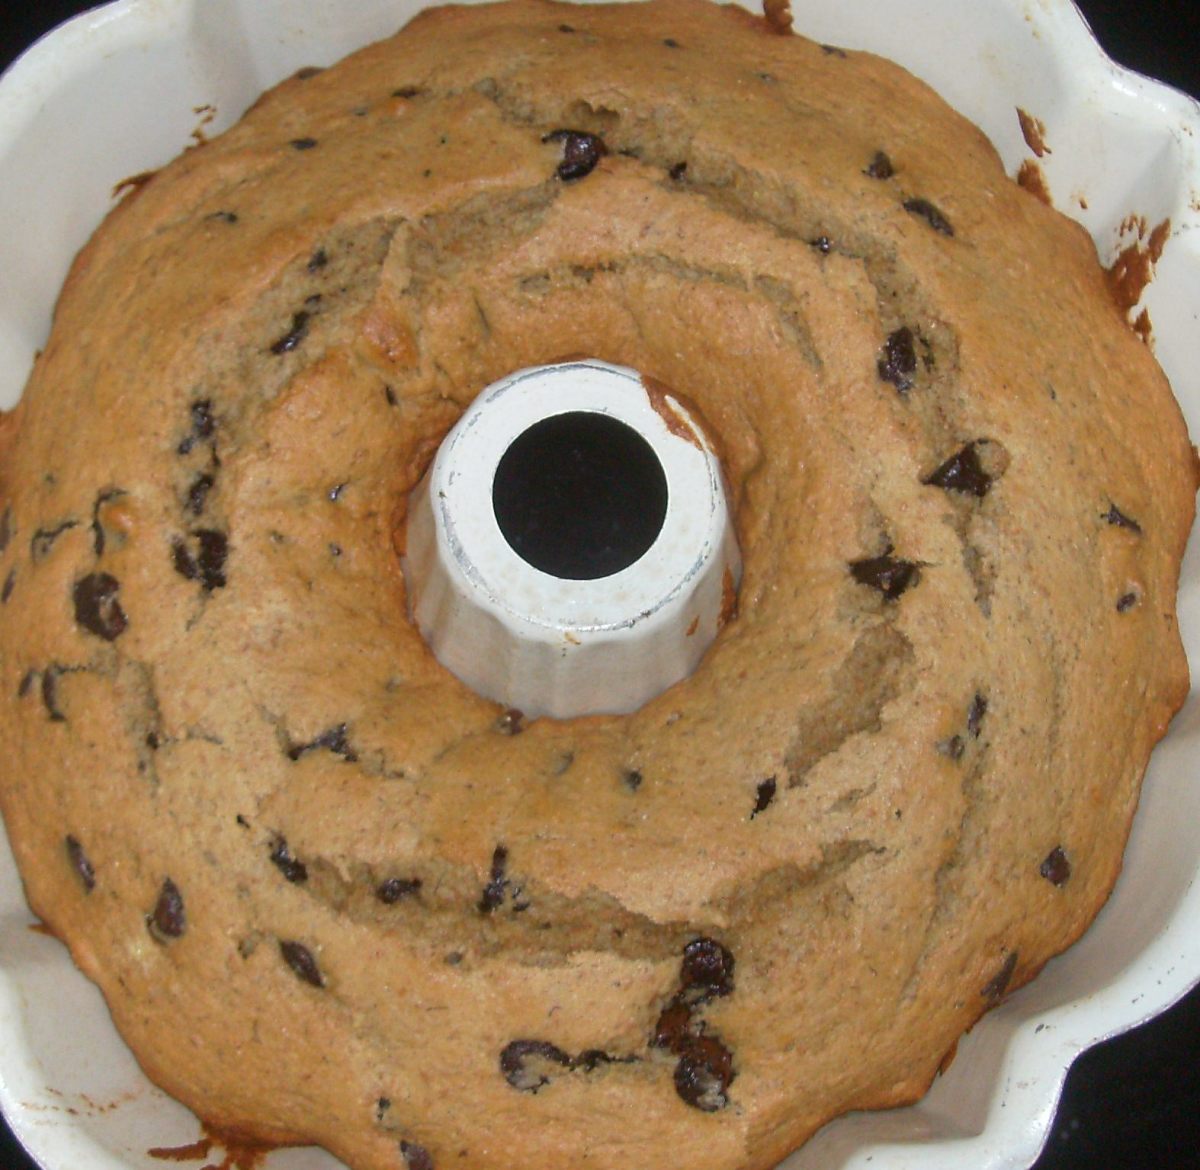 I used a bundt pan this time, one my mom had used for decades before giving it to me. Fun pan!